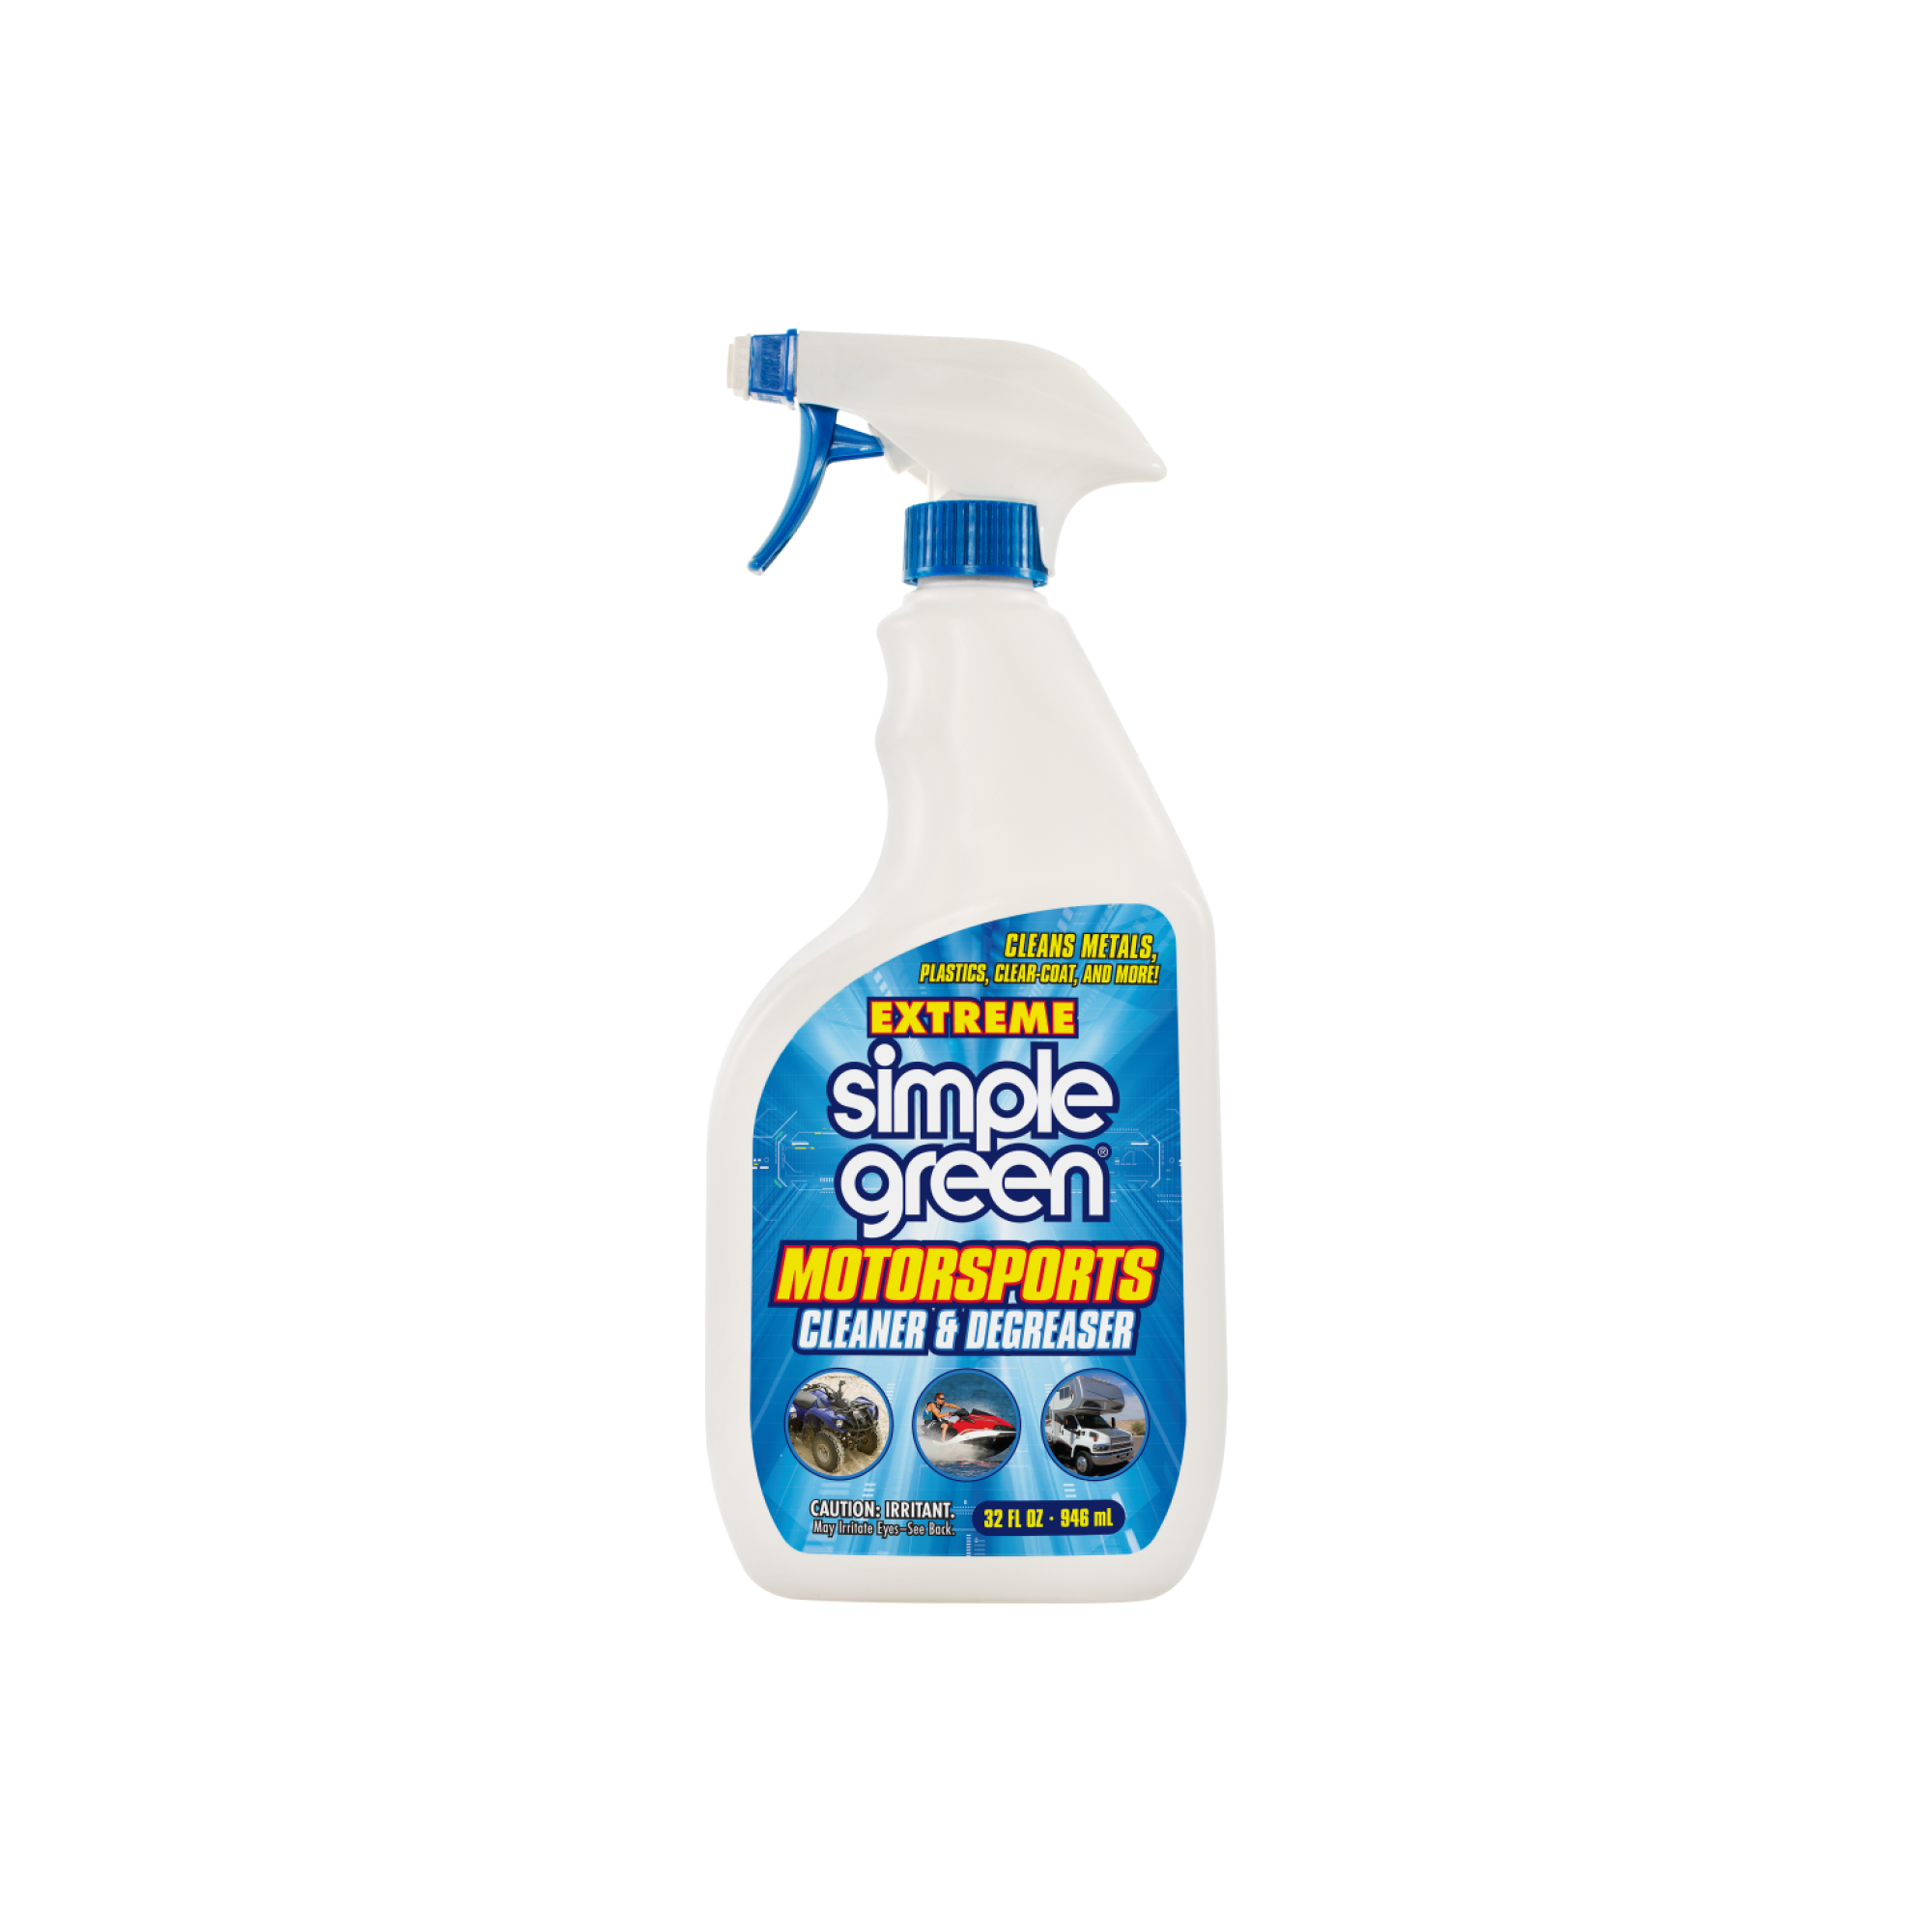 Extreme Simple Green® Motorsports Cleaner & Degreaser